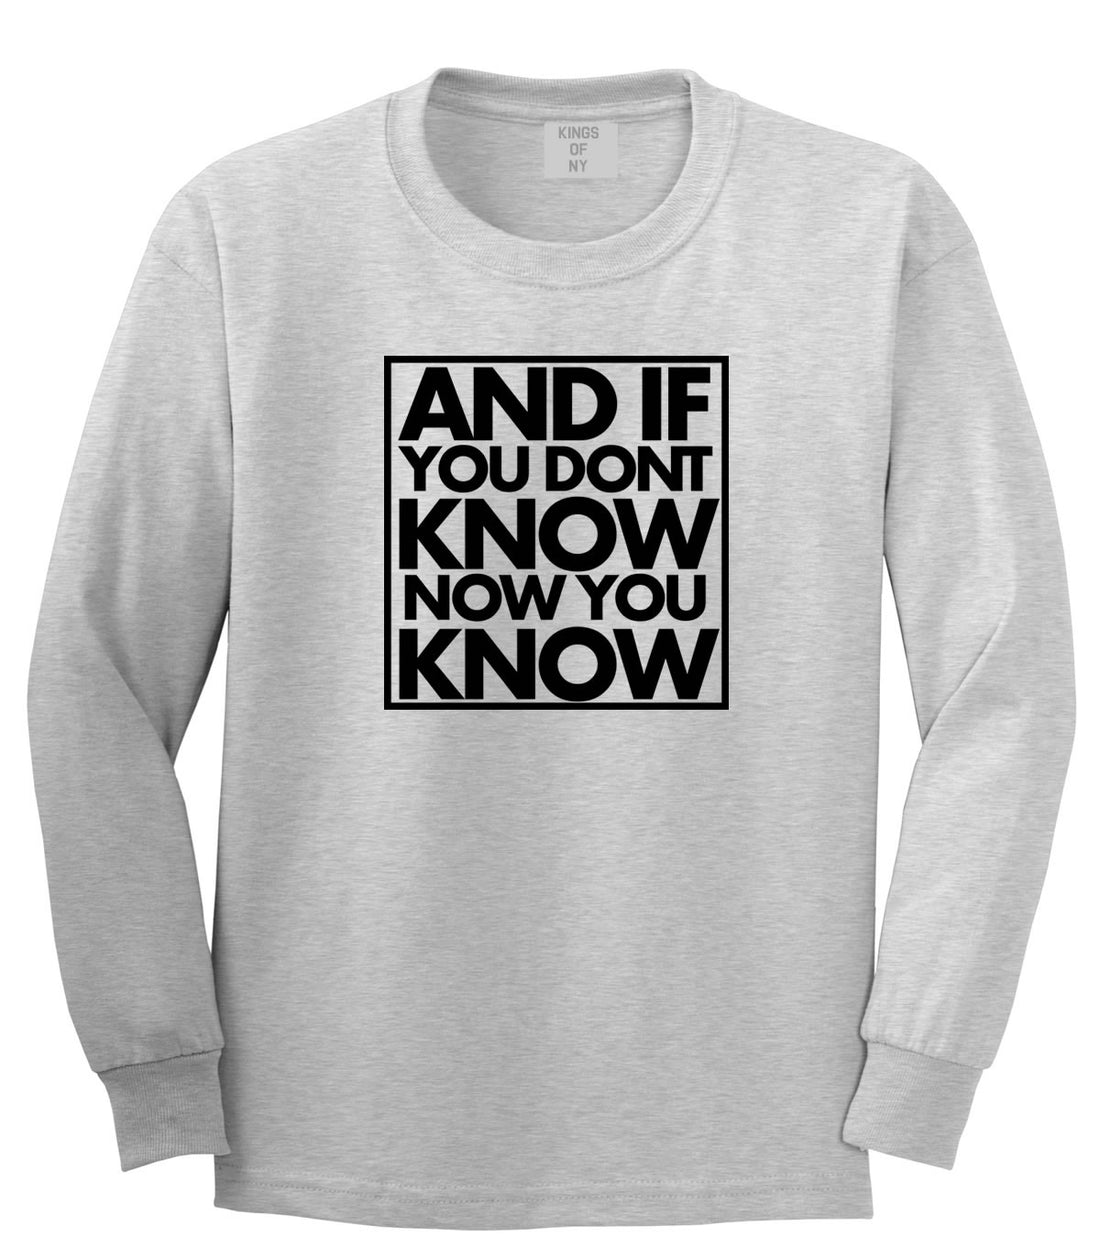 And If You Don't Know Now You Know Long Sleeve T-Shirt in Grey By Kings Of NY